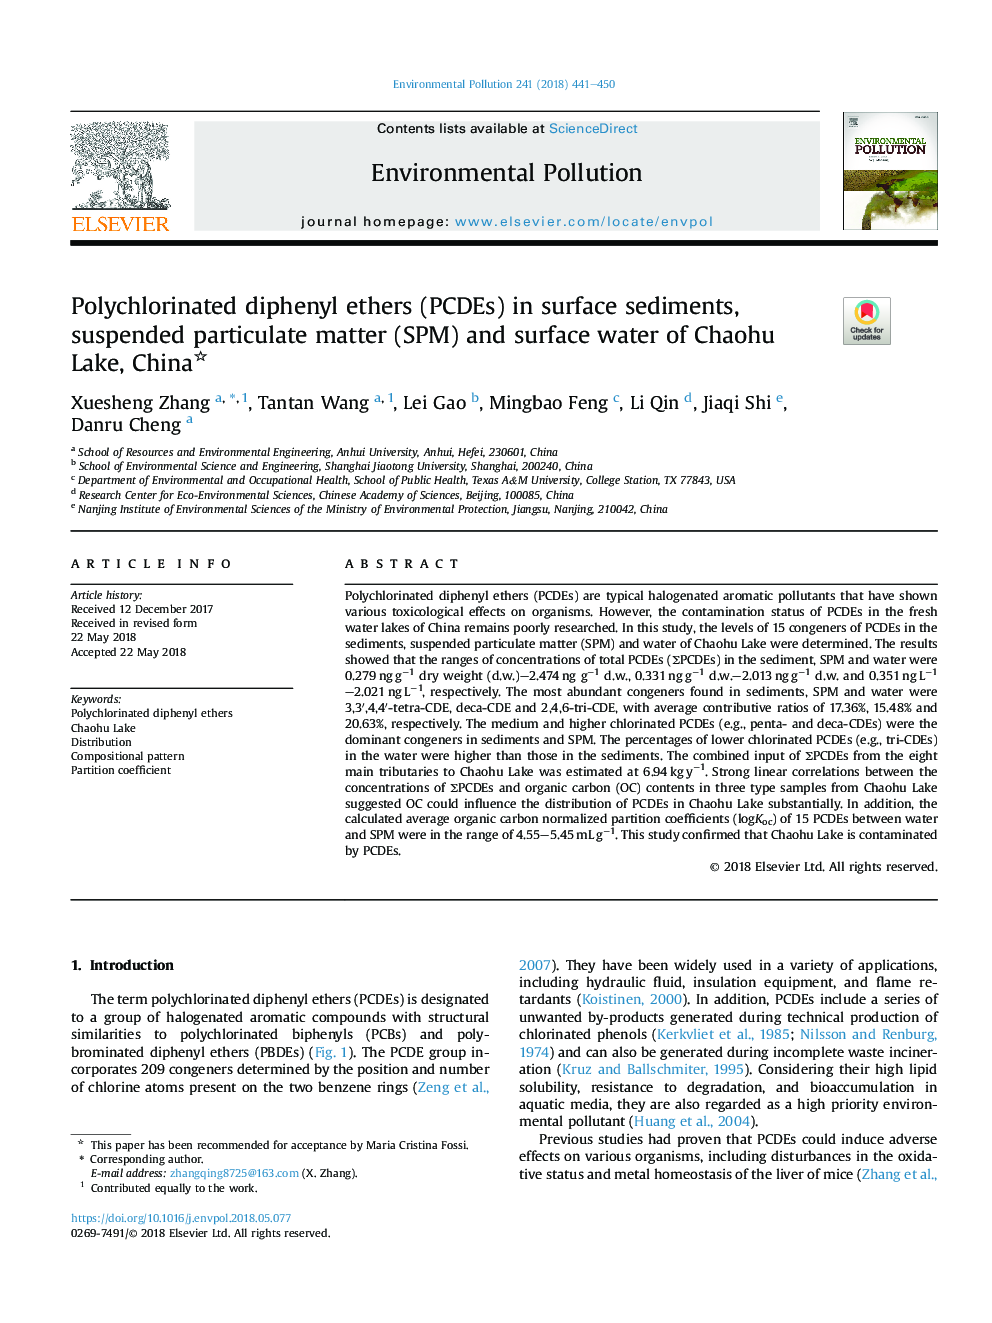 Polychlorinated diphenyl ethers (PCDEs) in surface sediments, suspended particulate matter (SPM) and surface water of Chaohu Lake, China